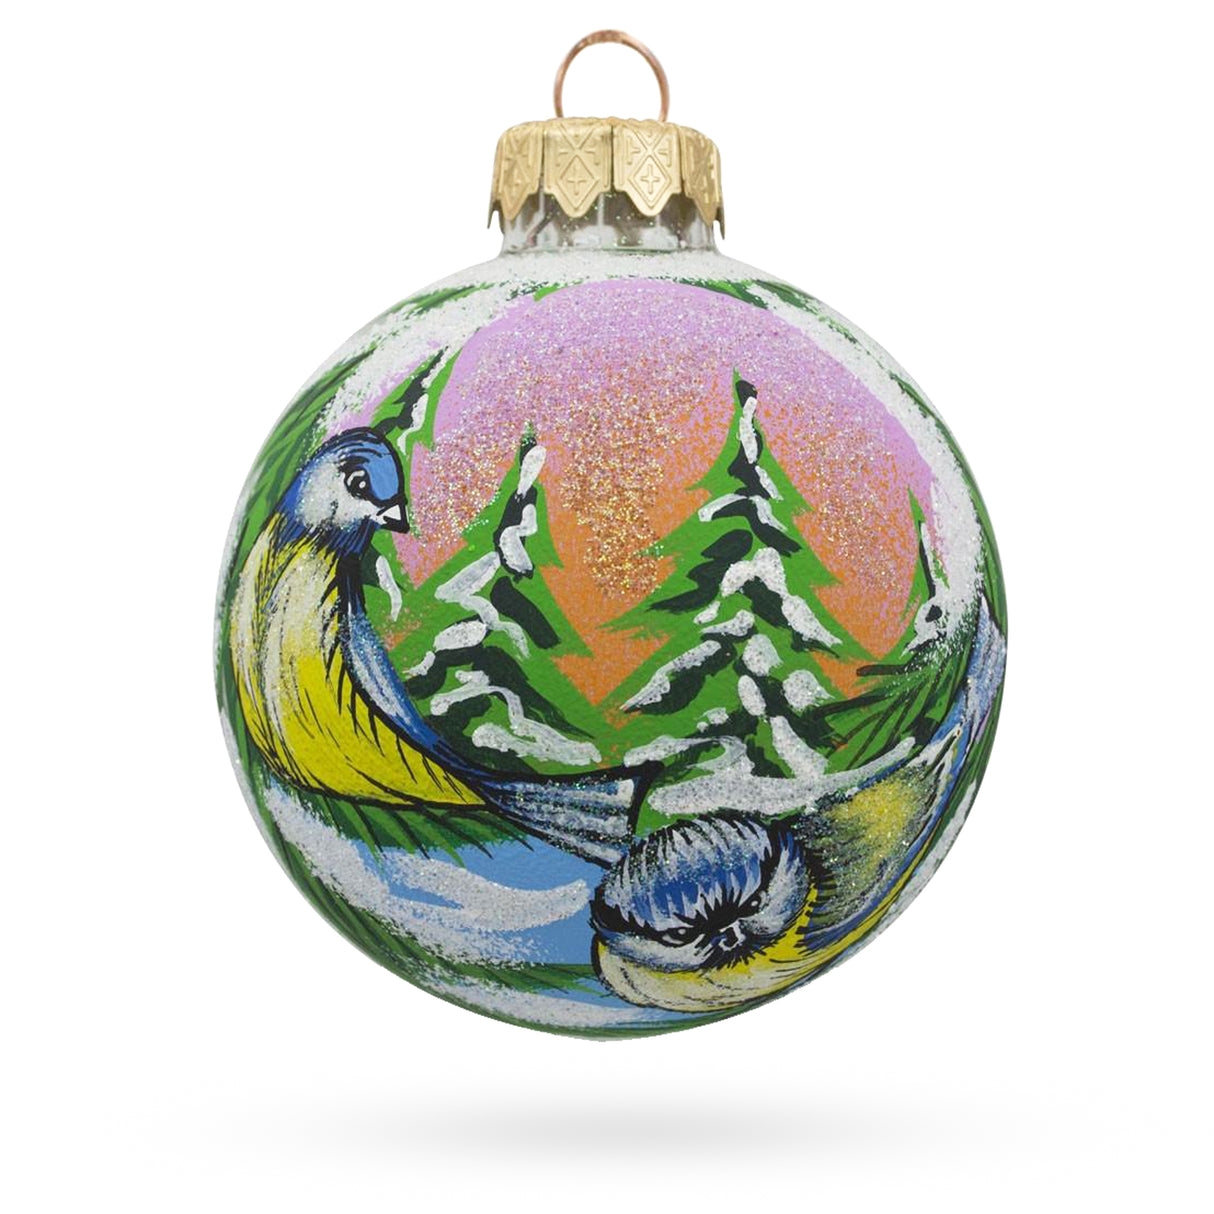 Glass Chirping Duo: Twin Blue Birds Blown Glass Ball Christmas Ornament 3.25 Inches in Multi color Round